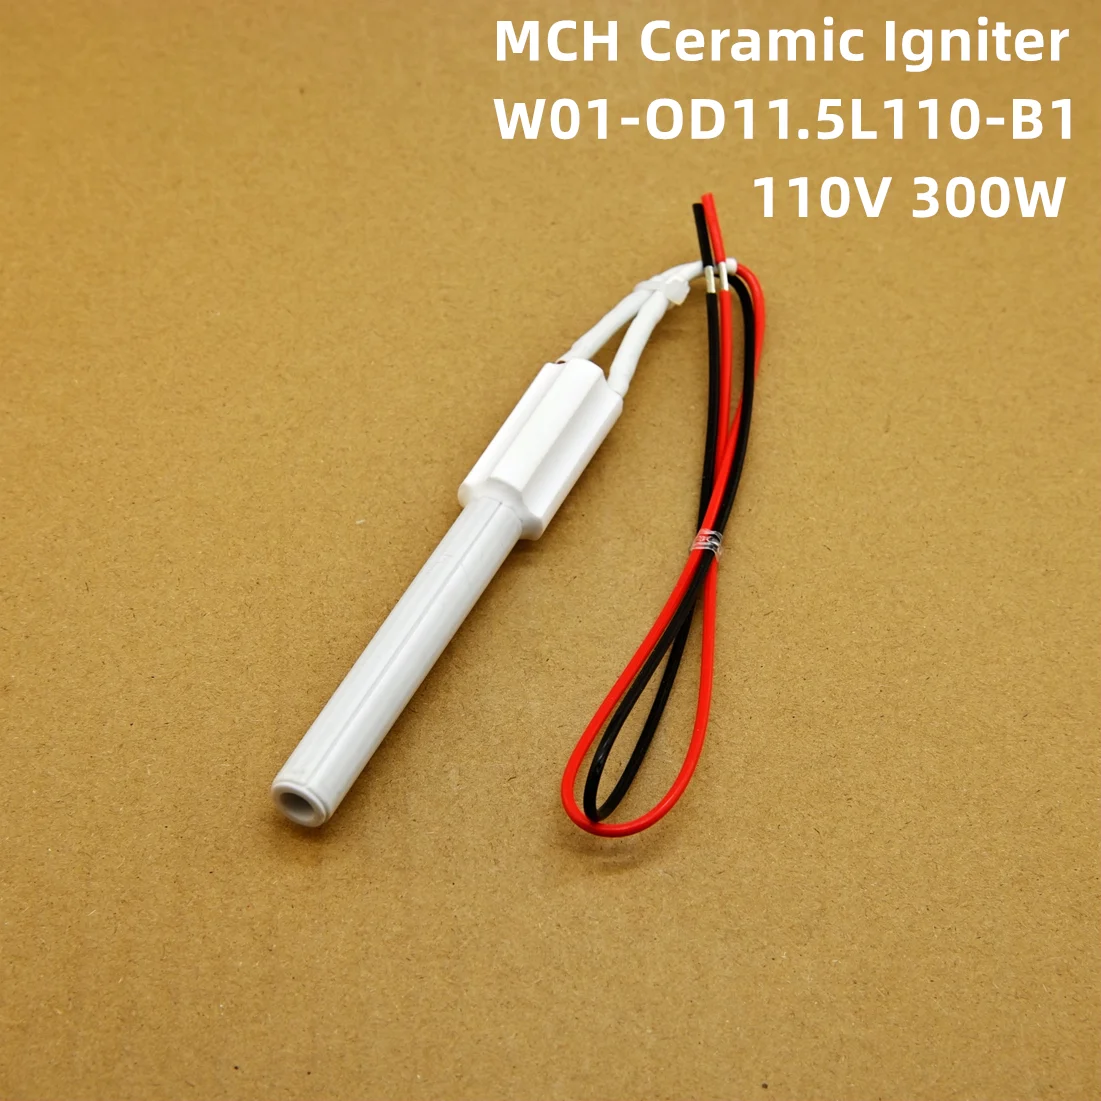 Pellet igniter 110v 300w  Fireplace heating furnace electric heating pipe ceramic igniter  kitchen accessories  ignition rod